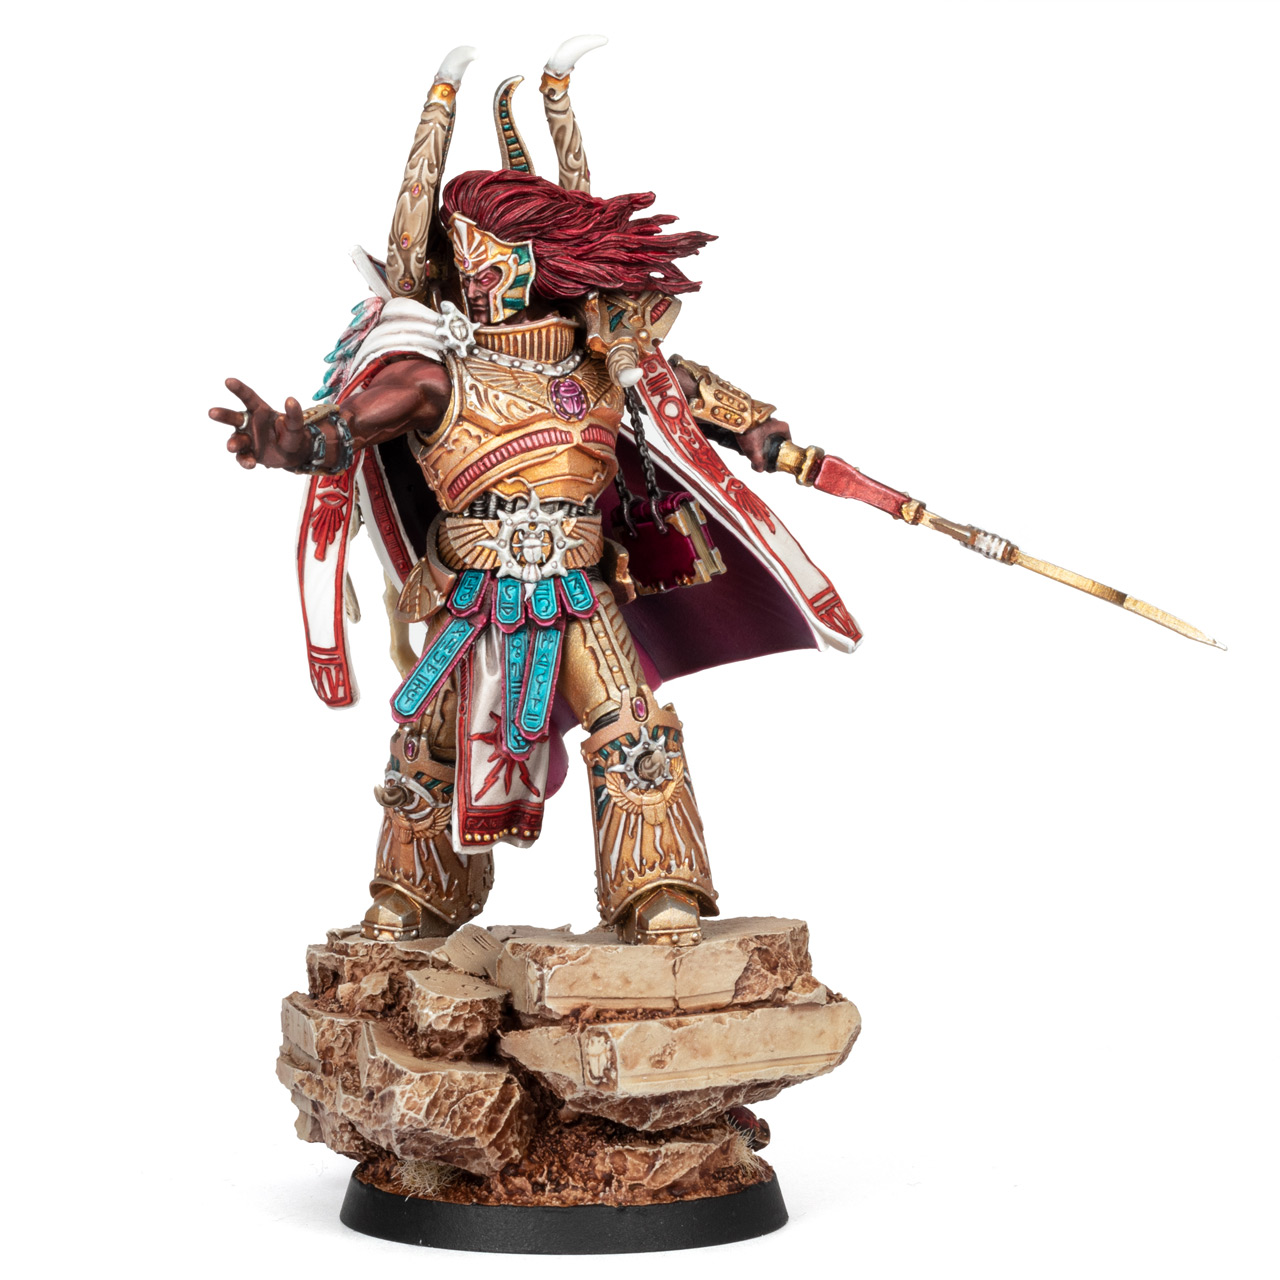 The Horus Heresy Magnus the Red, painted by Stahly